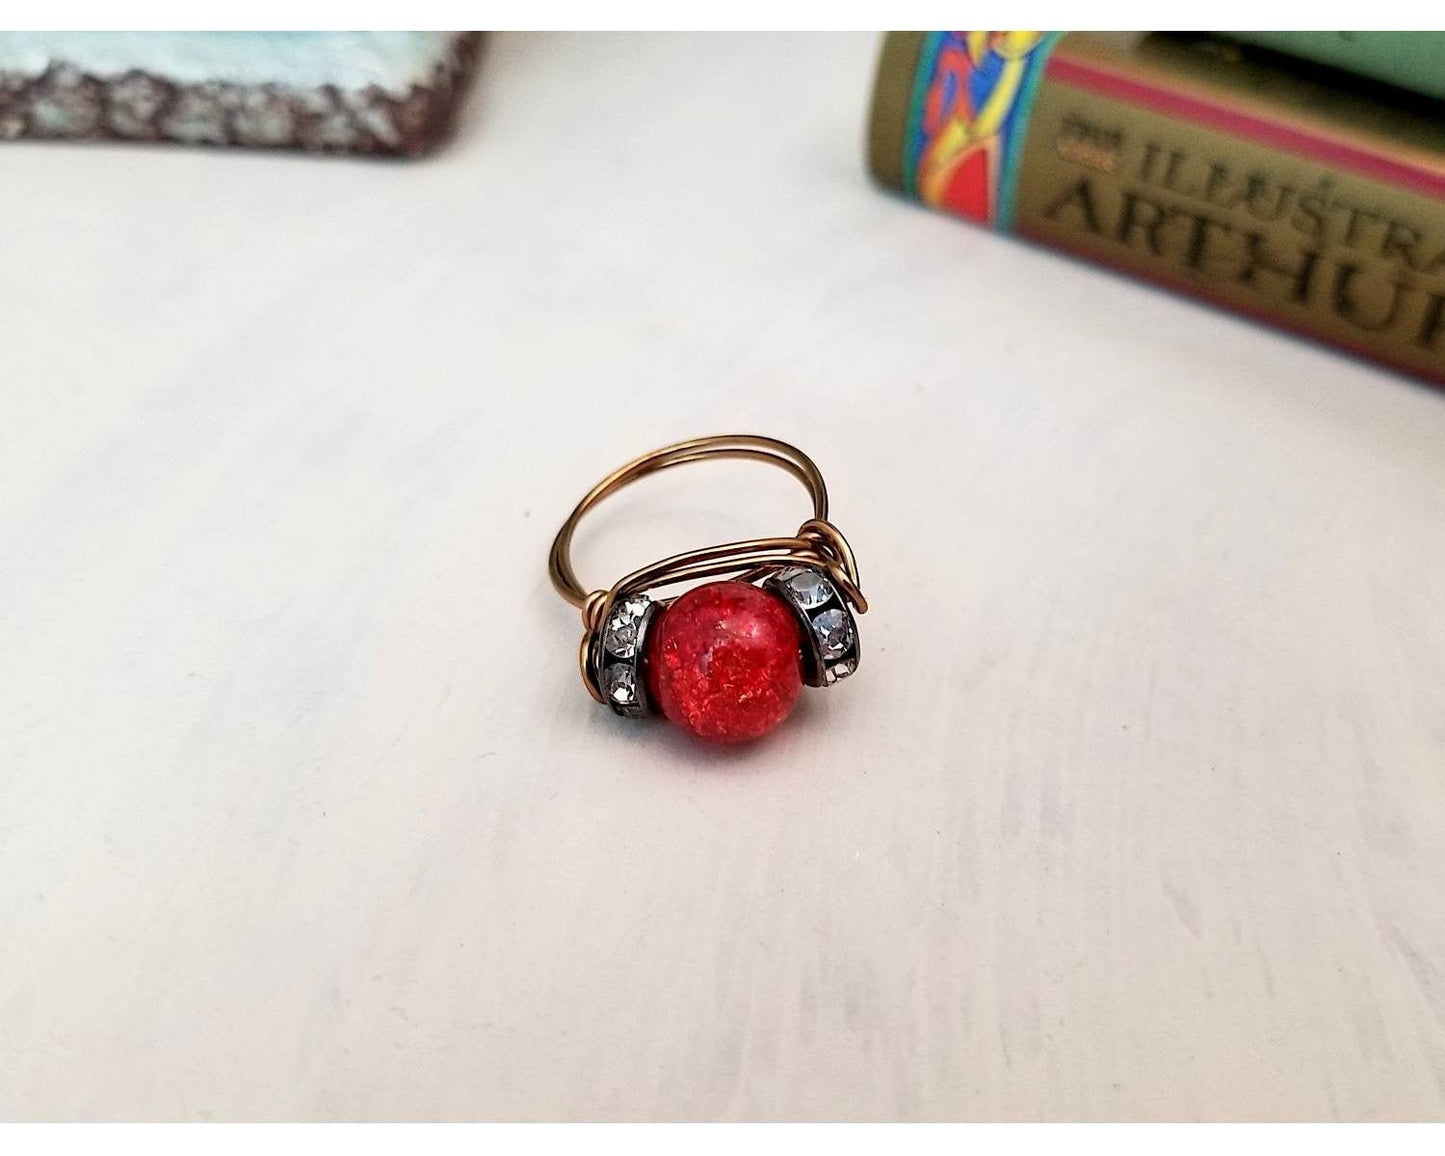 Wire Ring in Red-Orange Crackle with Rhinestones, Fairy Tale, Renaissance, Medieval, Choice of Colors and Metals